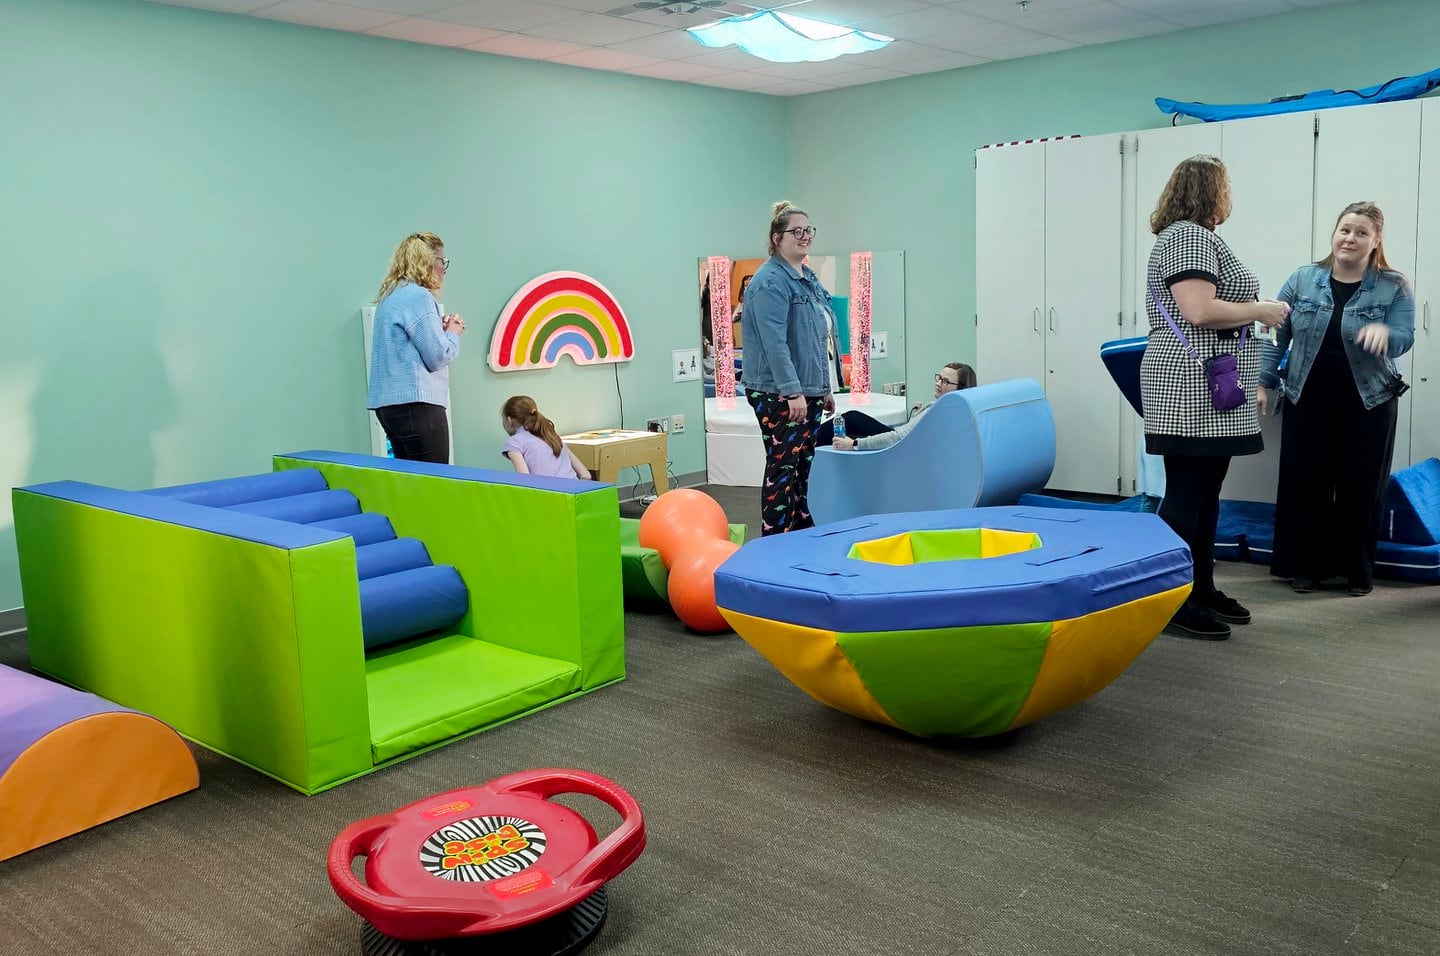 Several people sit and stand in a room full of sensory learning objects with blue walls in the background.